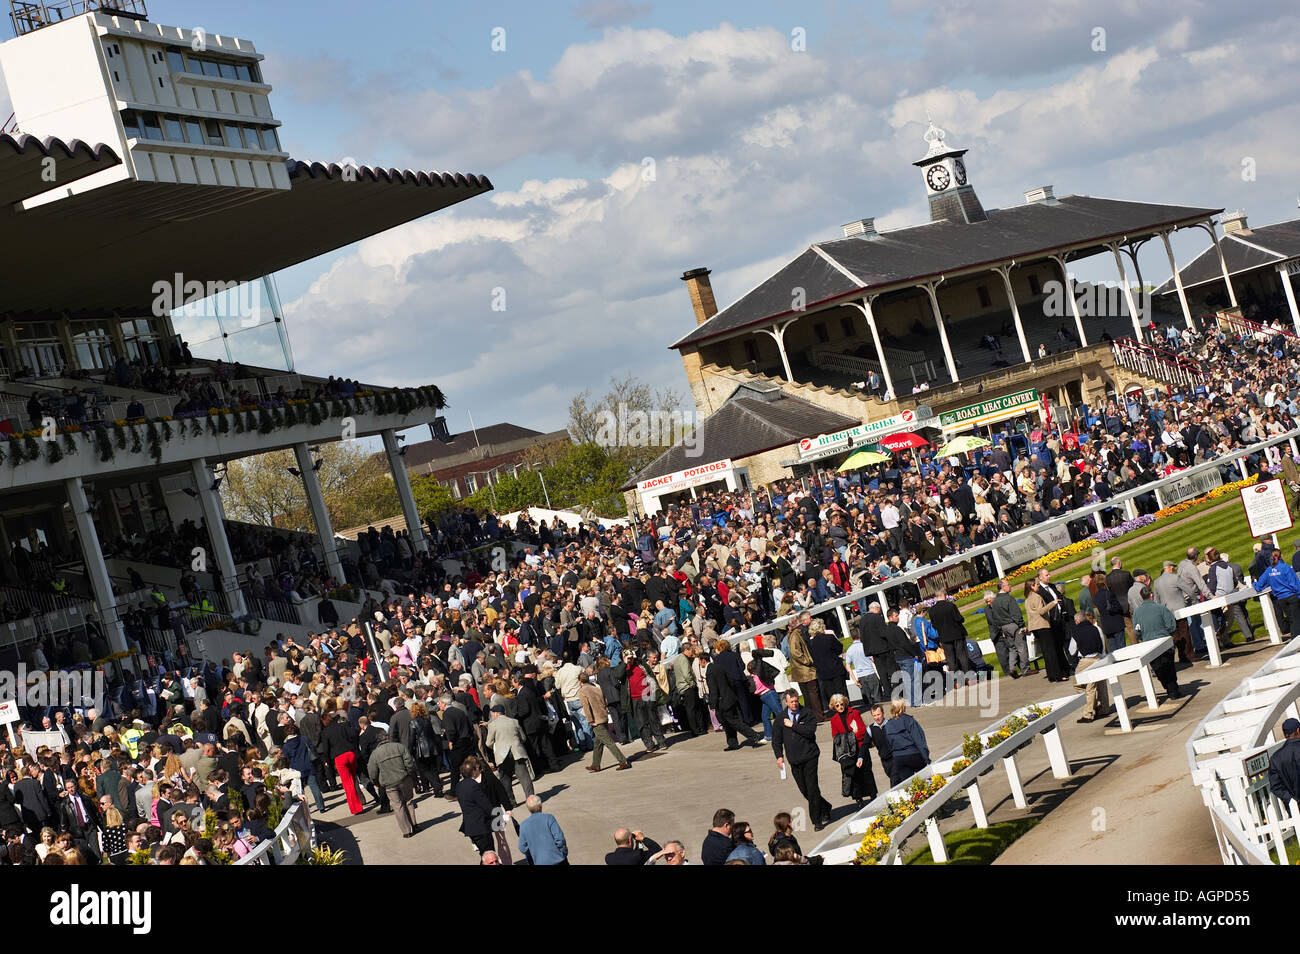 Crowds of people at Doncaster Racecourse Yorkshire England UK Stock Photo